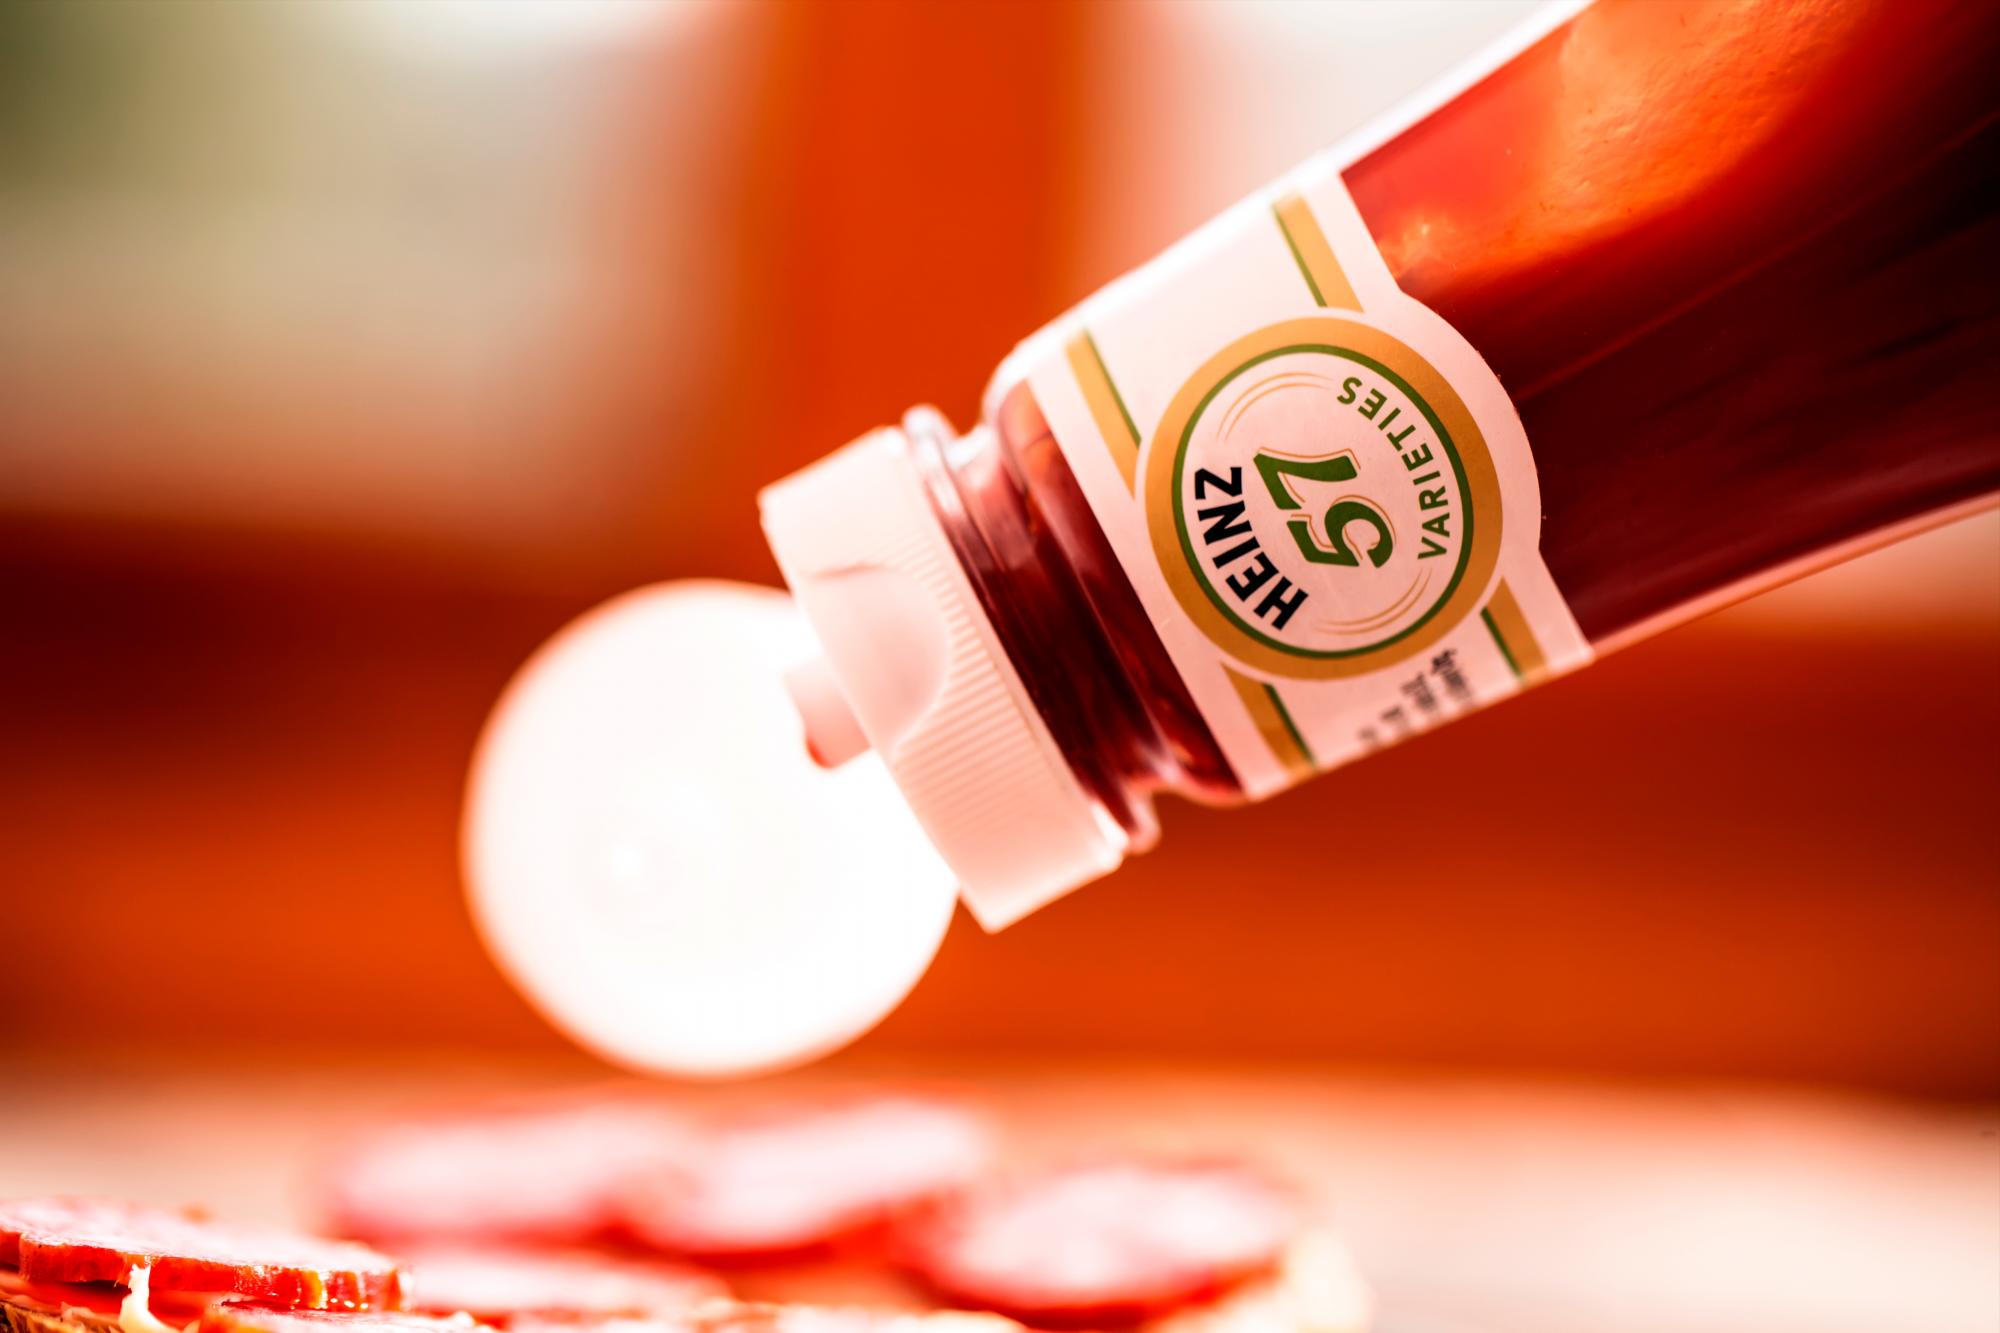 A collection of ketchup in the EU obliges Heinz to increase production by 25%